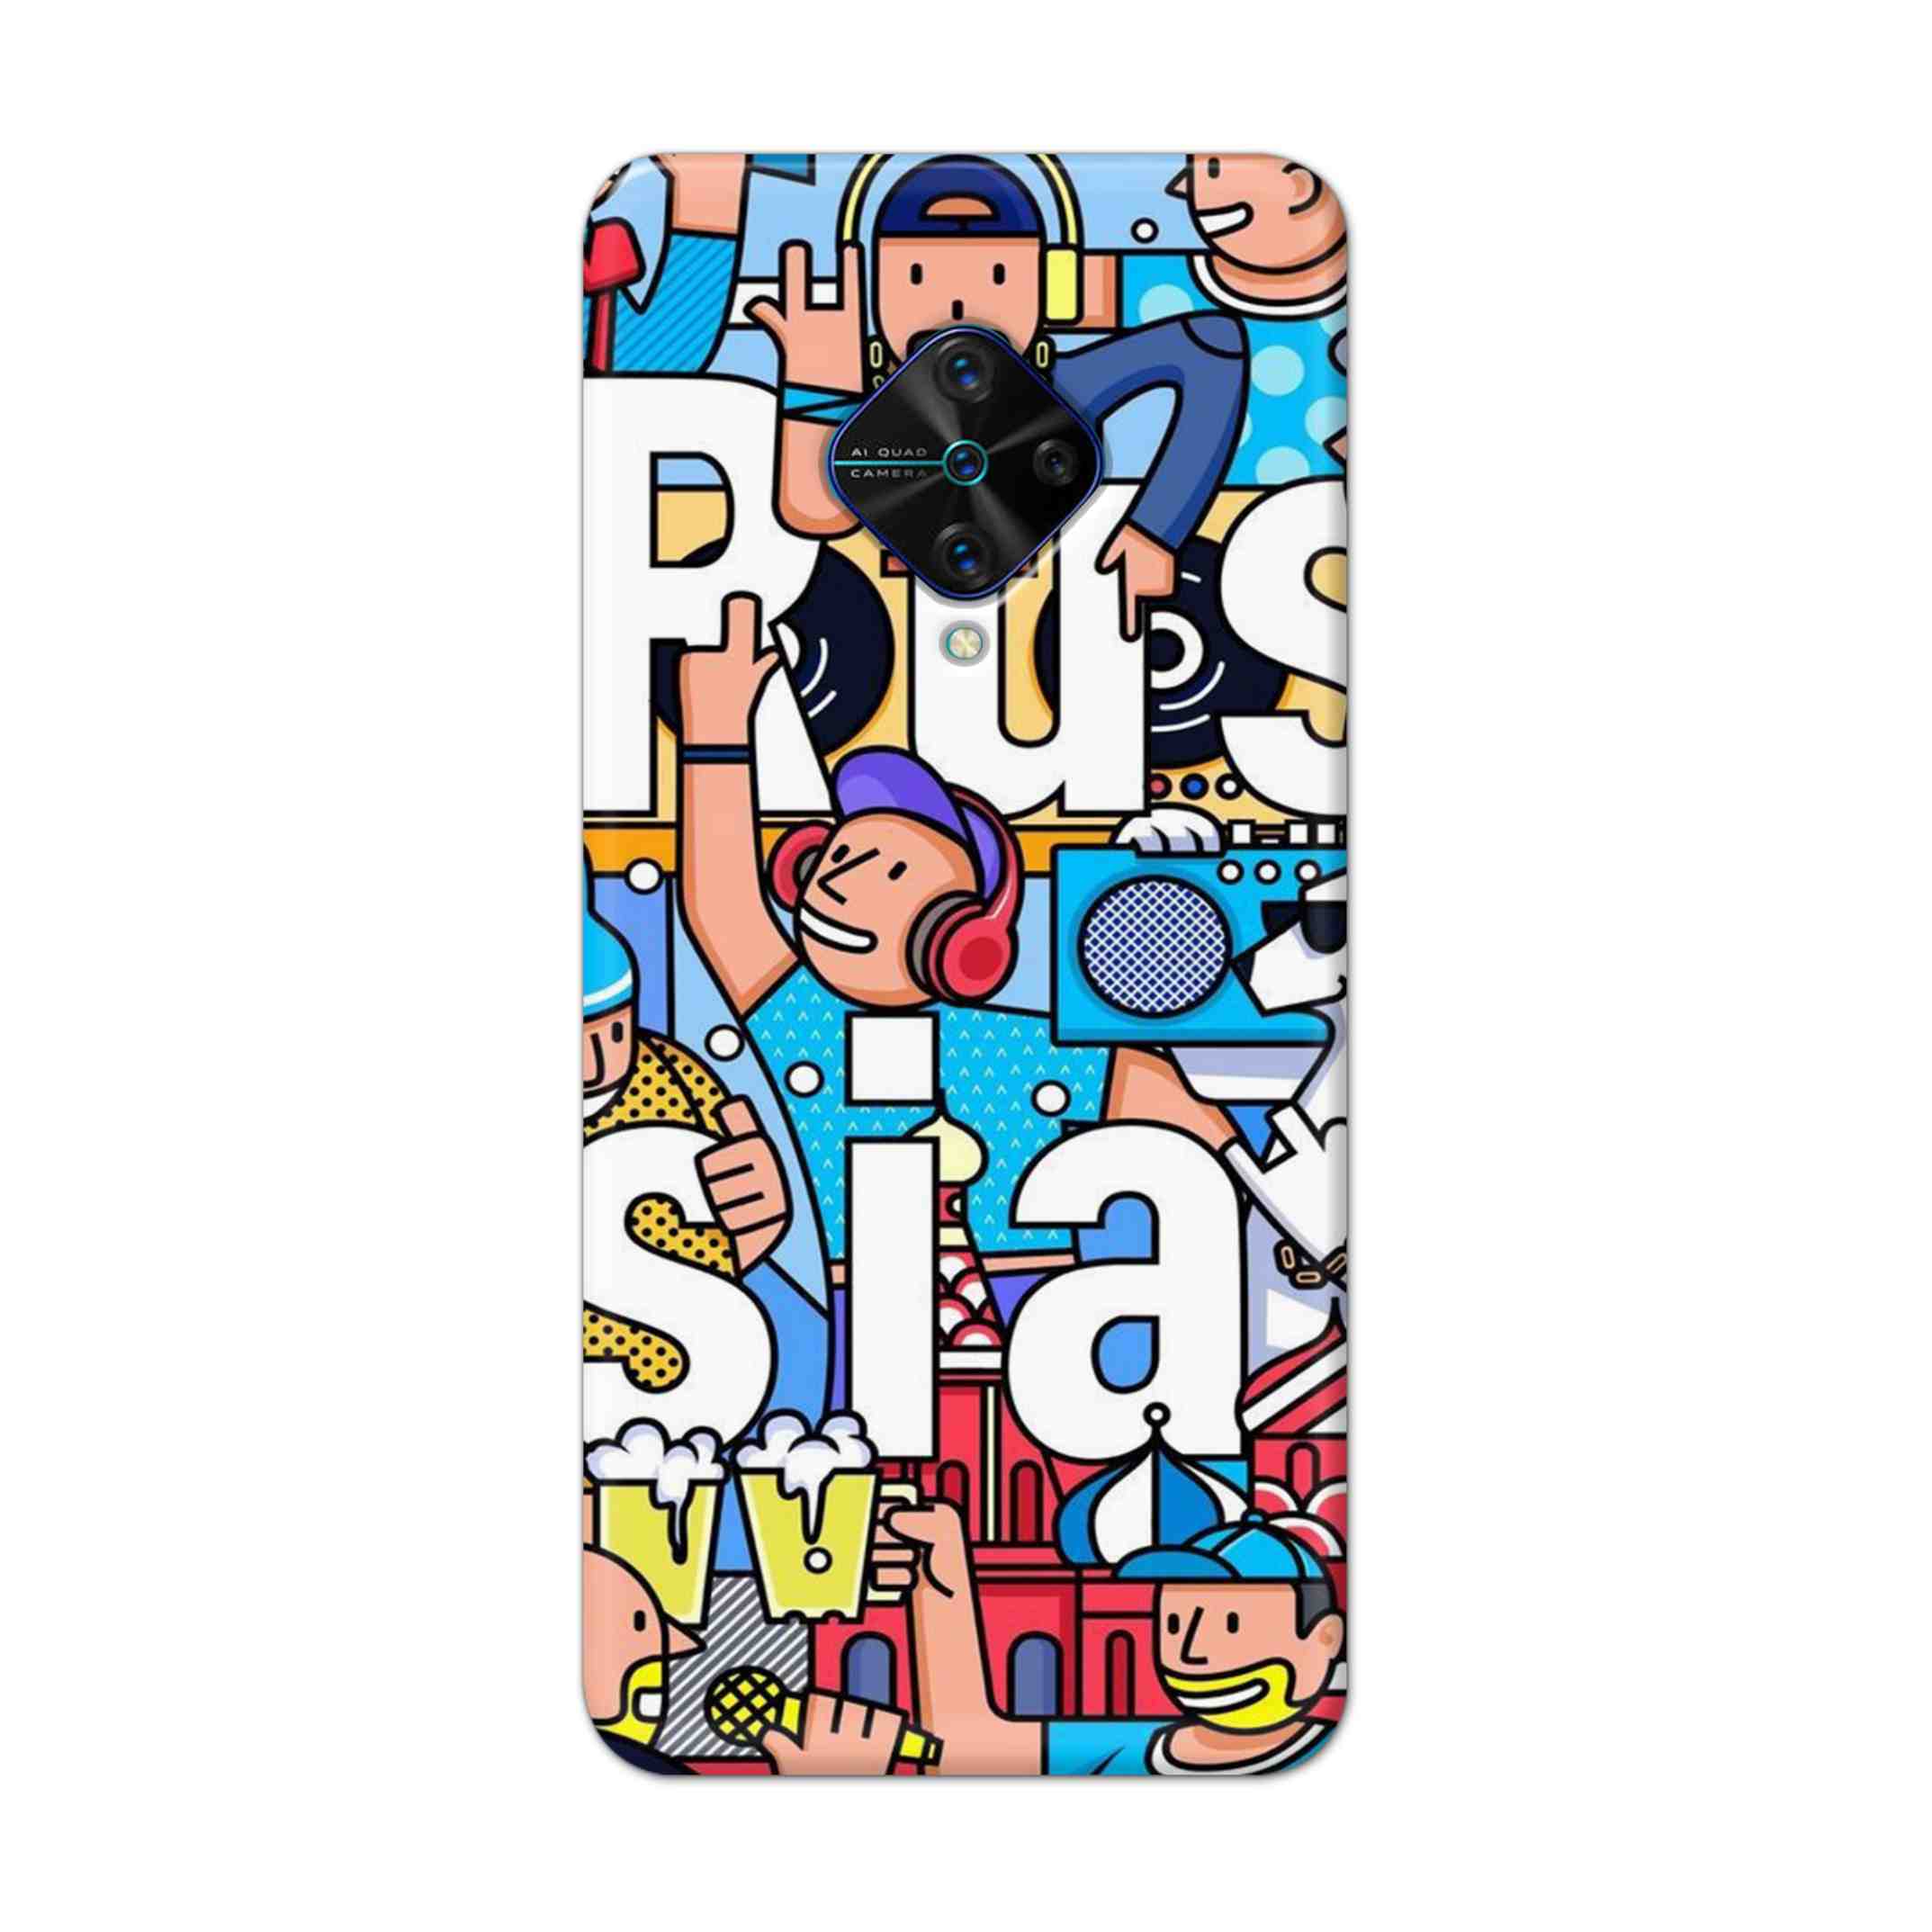 Buy Russia Hard Back Mobile Phone Case Cover For Vivo S1 Pro Online